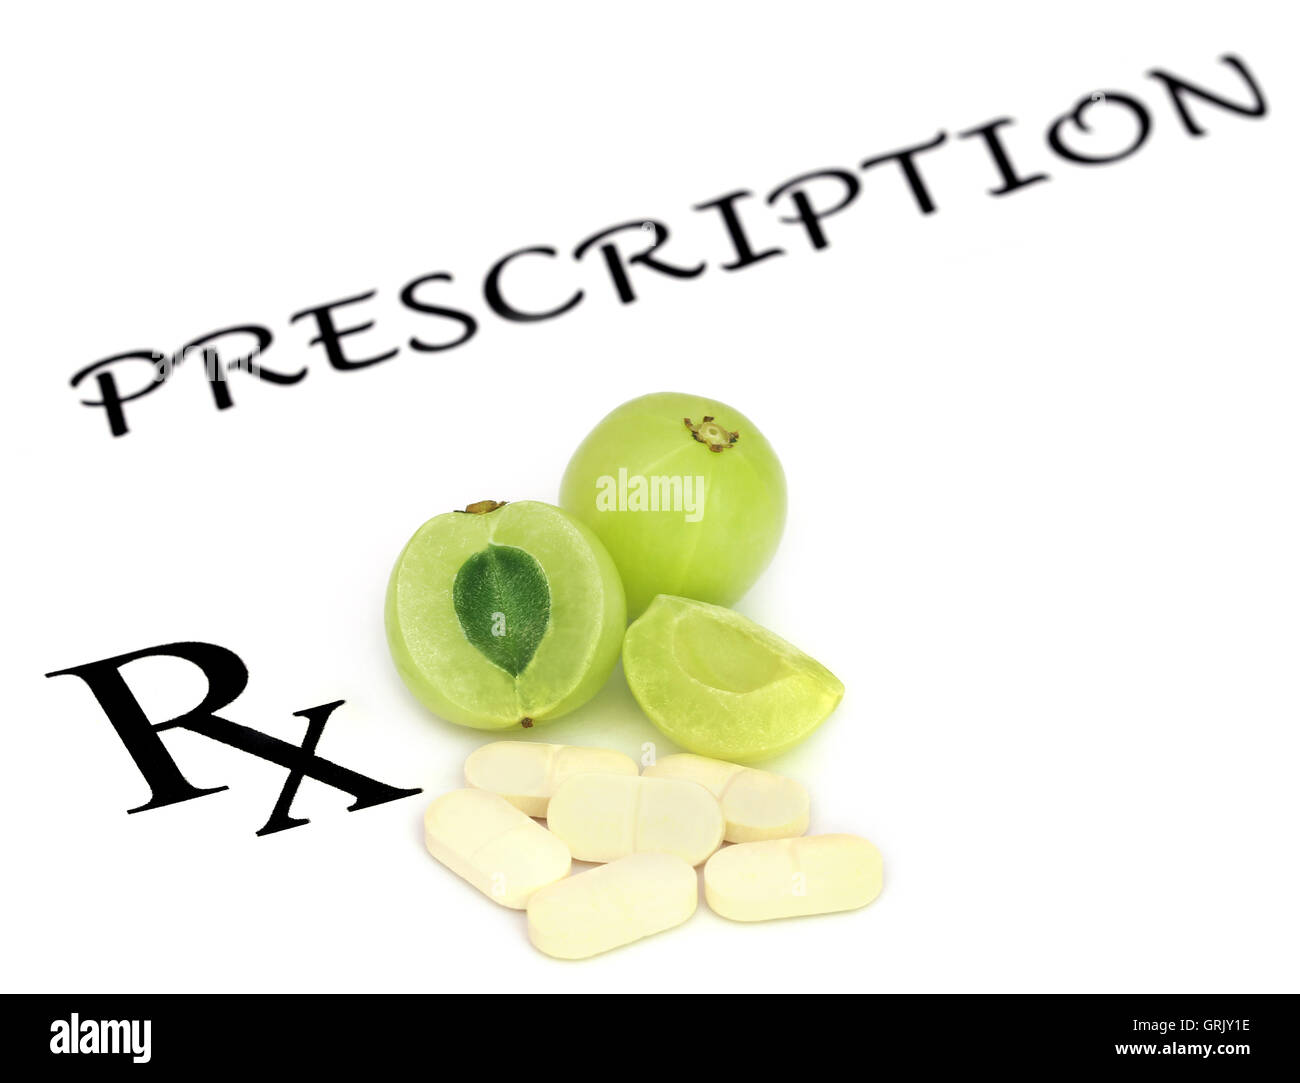 Amla fruits with pills in a prescription Stock Photo